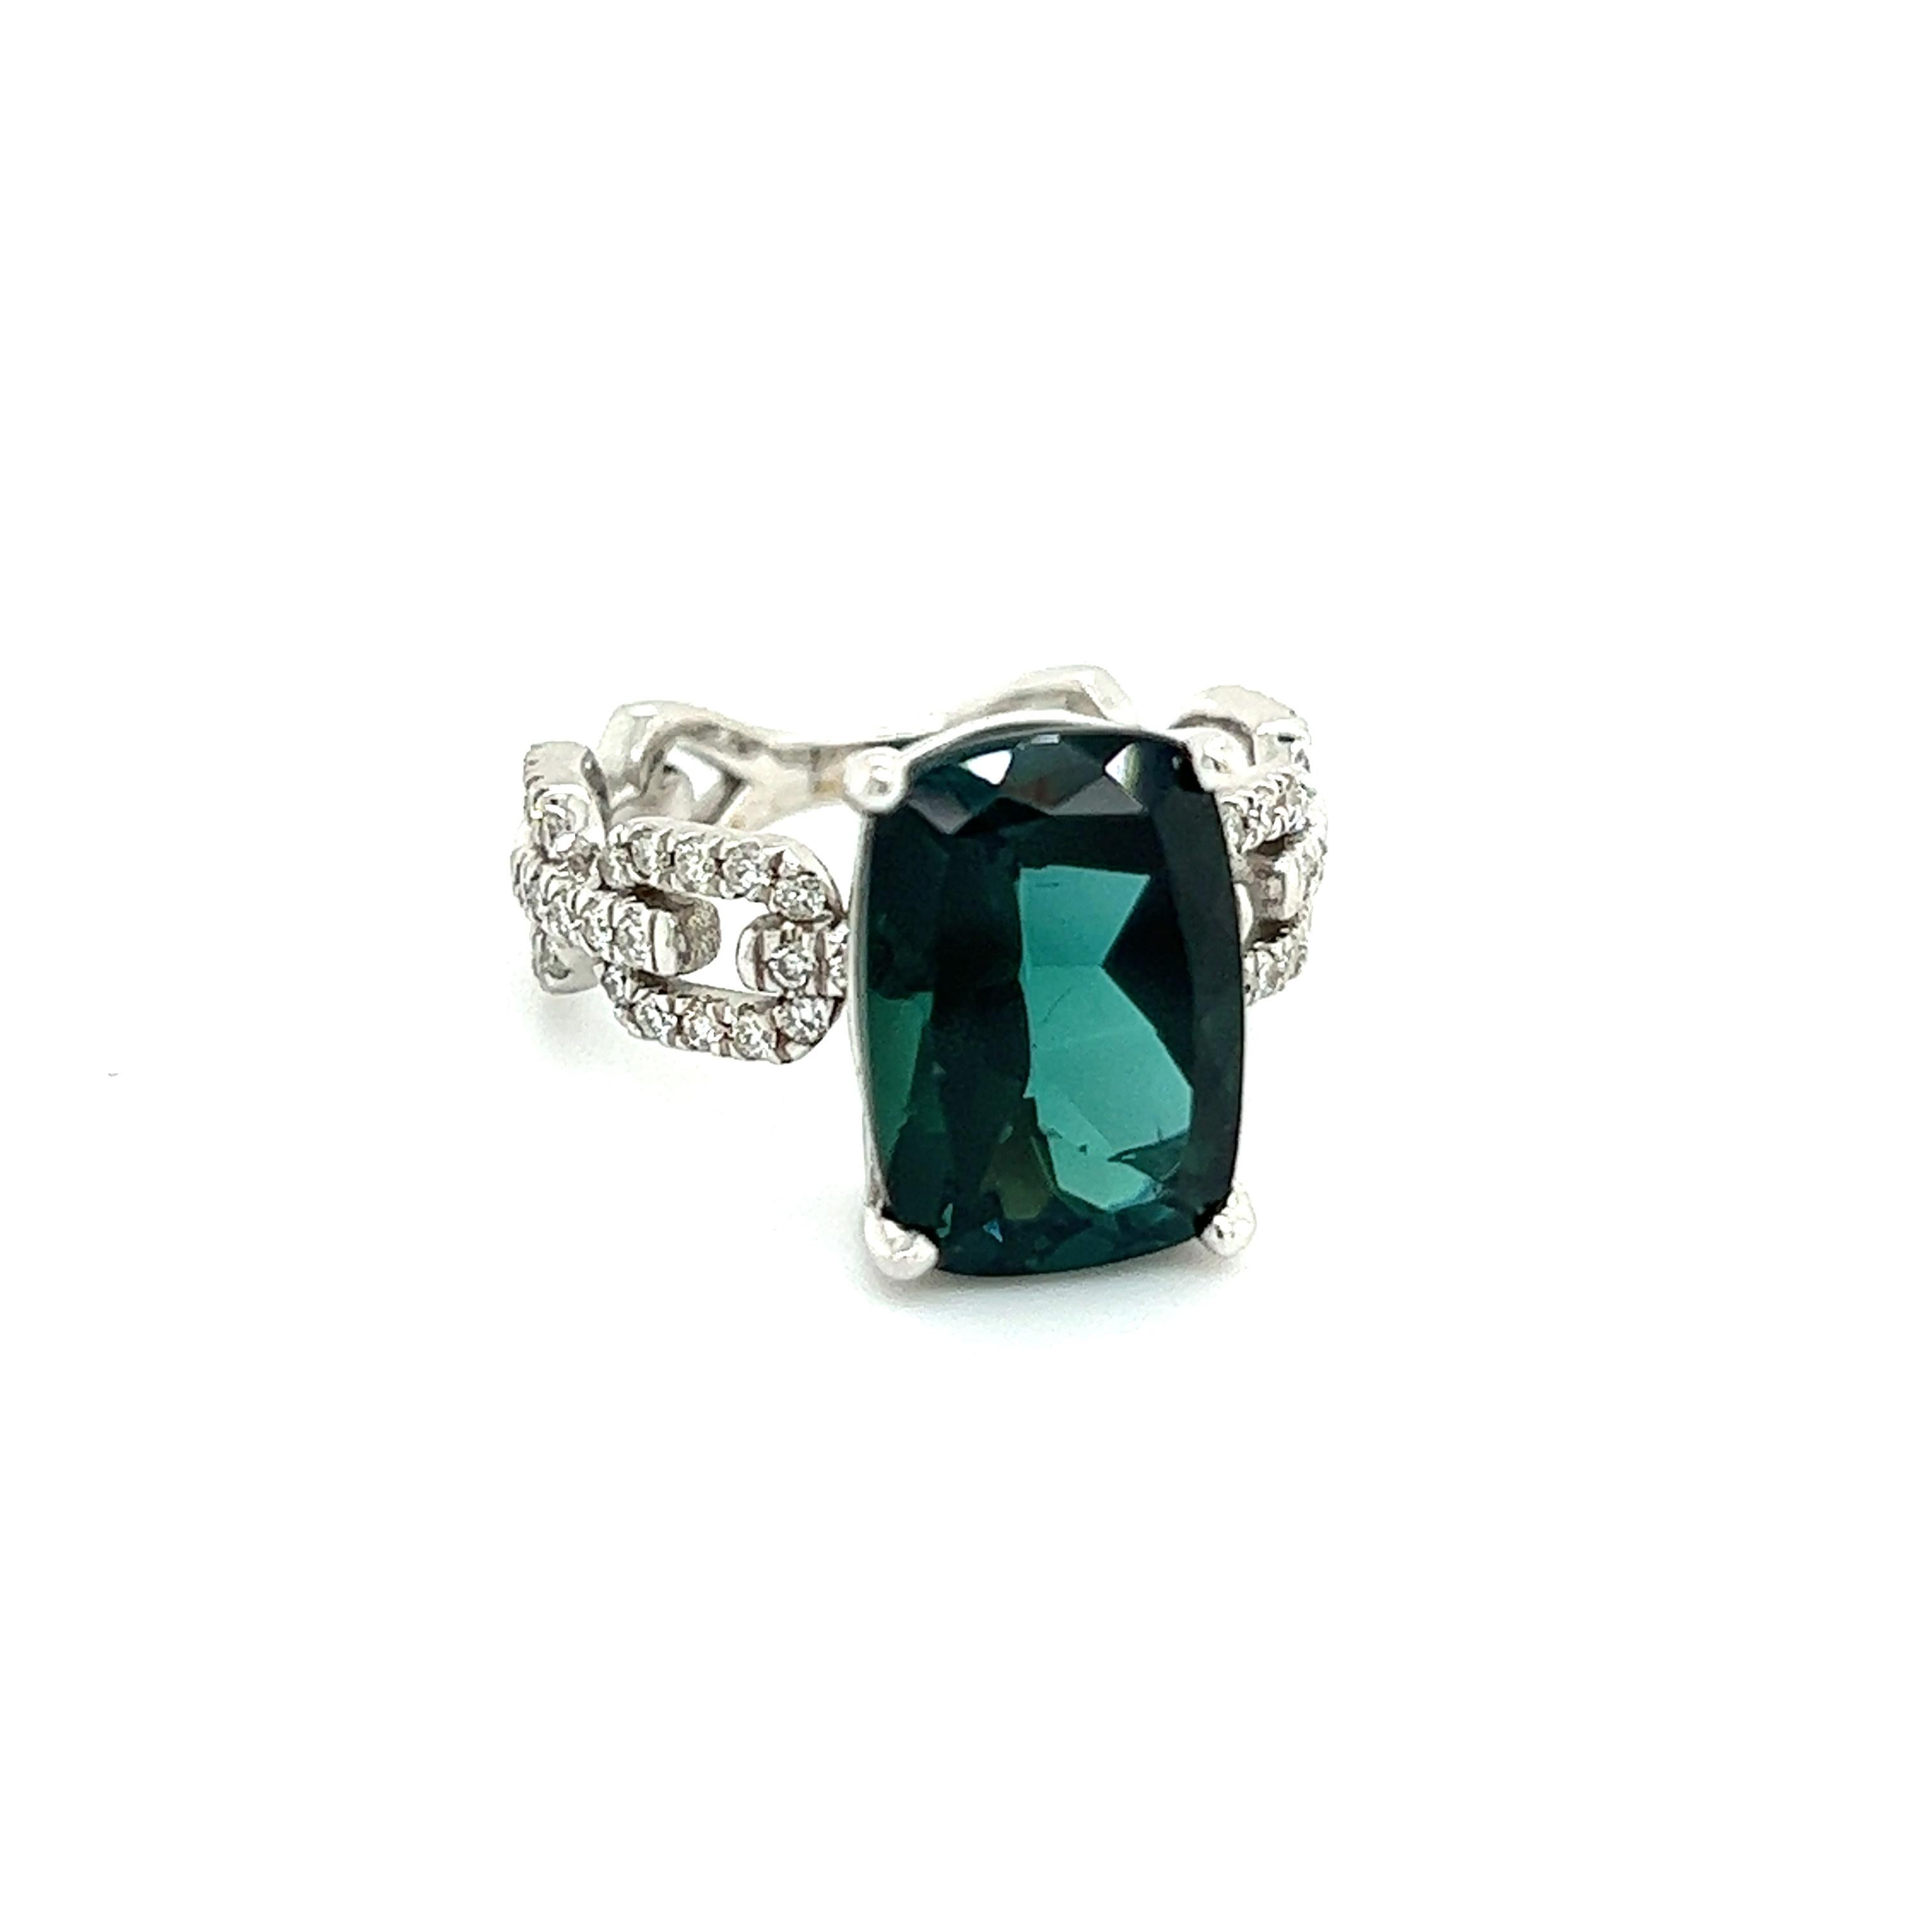 Natural Tourmaline Diamond Ring 6.5 14k White Gold 6.32 TCW Certified For Sale 4